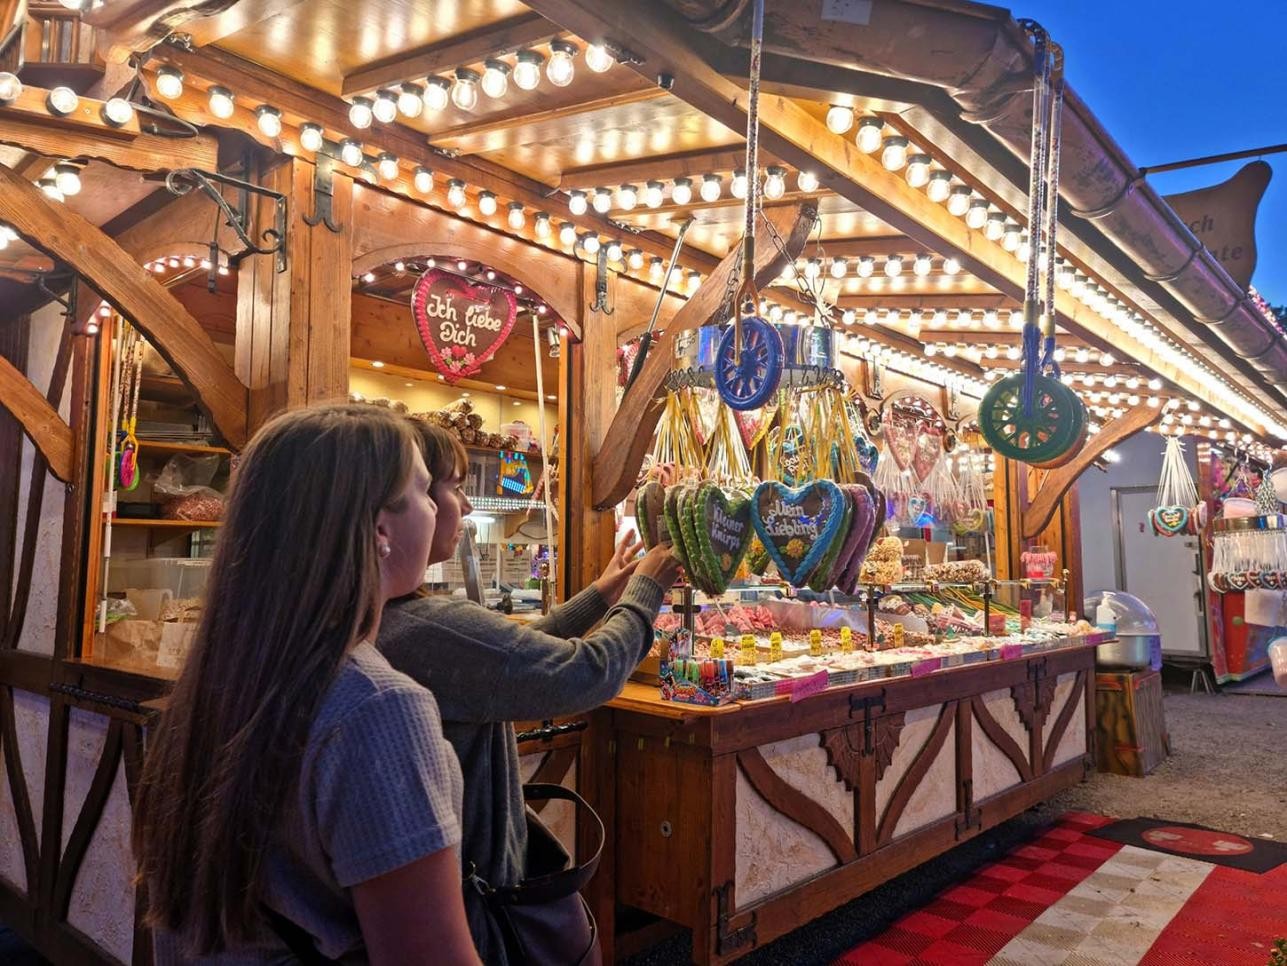 Girl at the candy stand